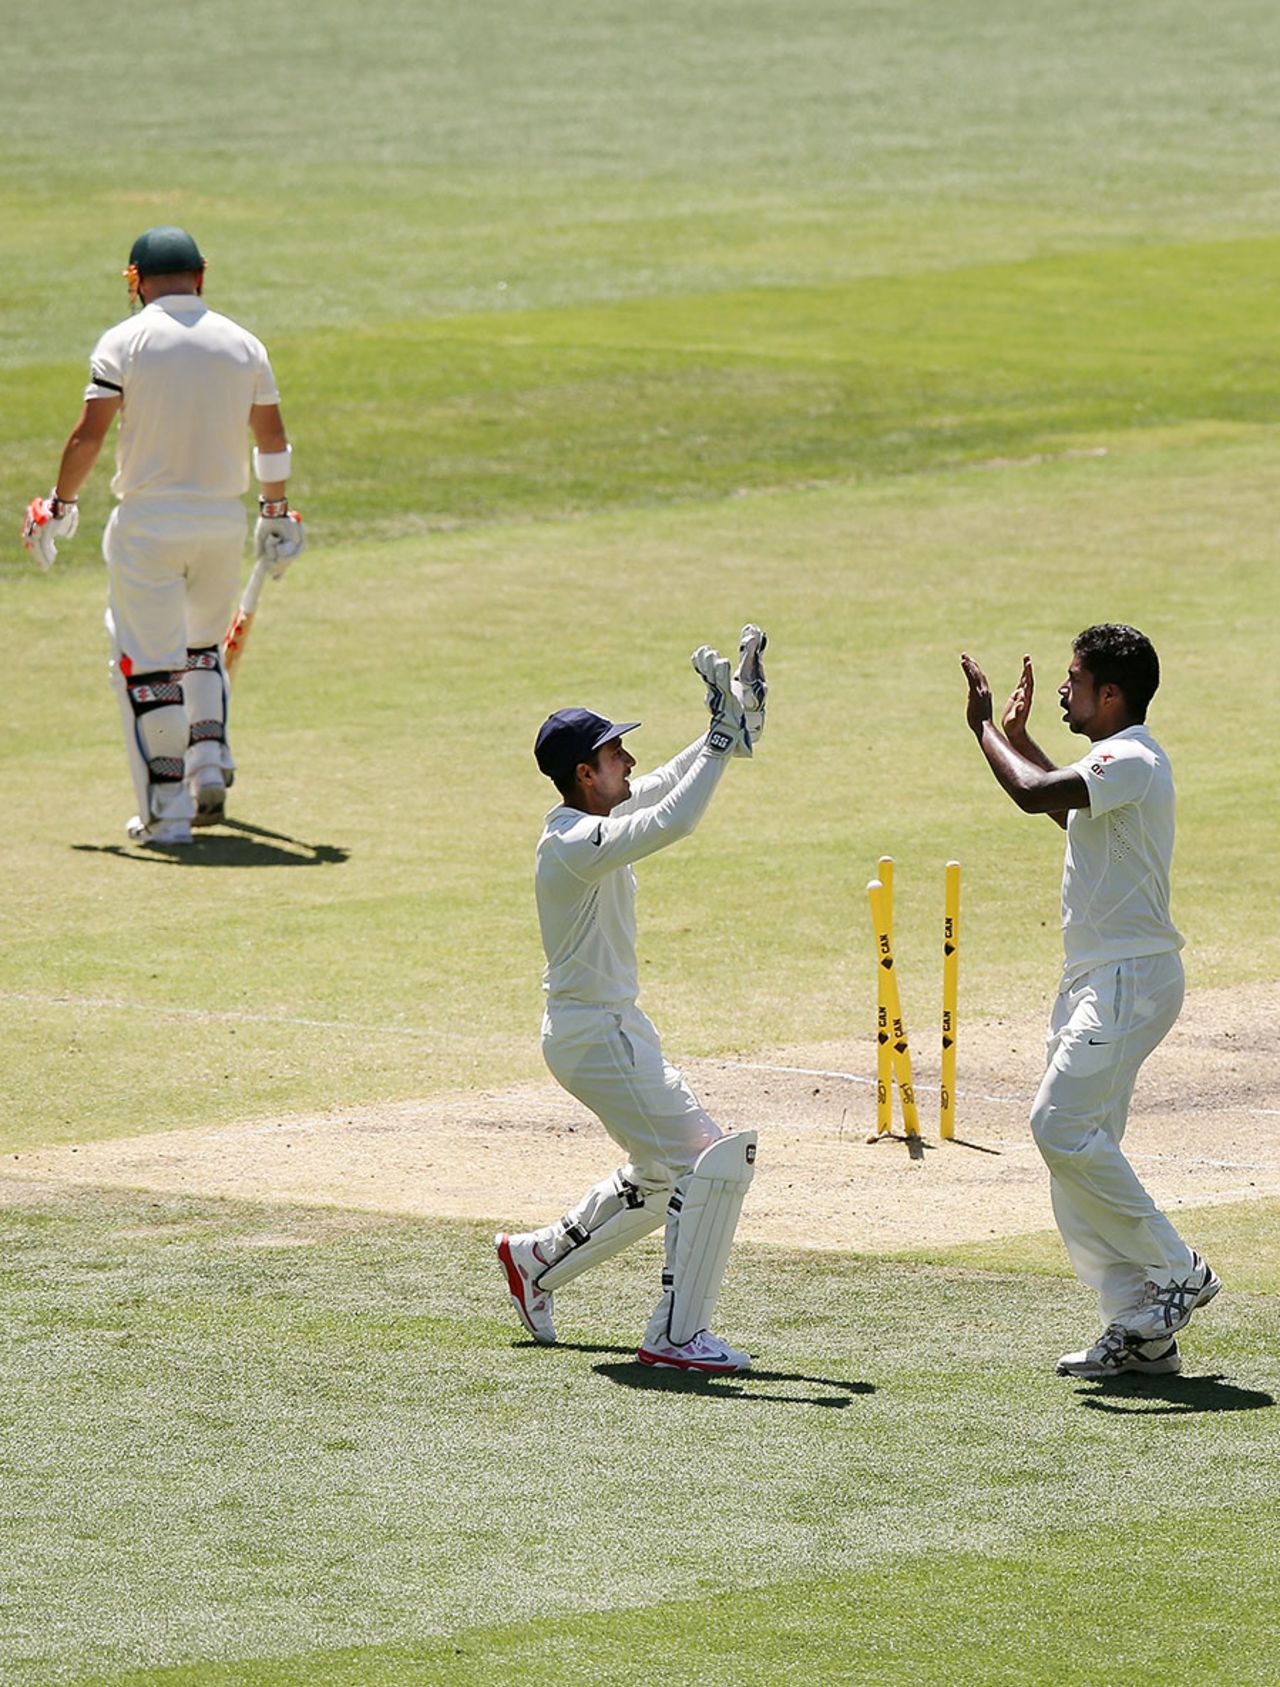 Varun Aaron and Wriddhiman Saha celebrate getting David Warner bowled before the third umpire confirms the bowler has overstepped, Australia v India, 1st Test, Adelaide, 4th day, December 12, 2014